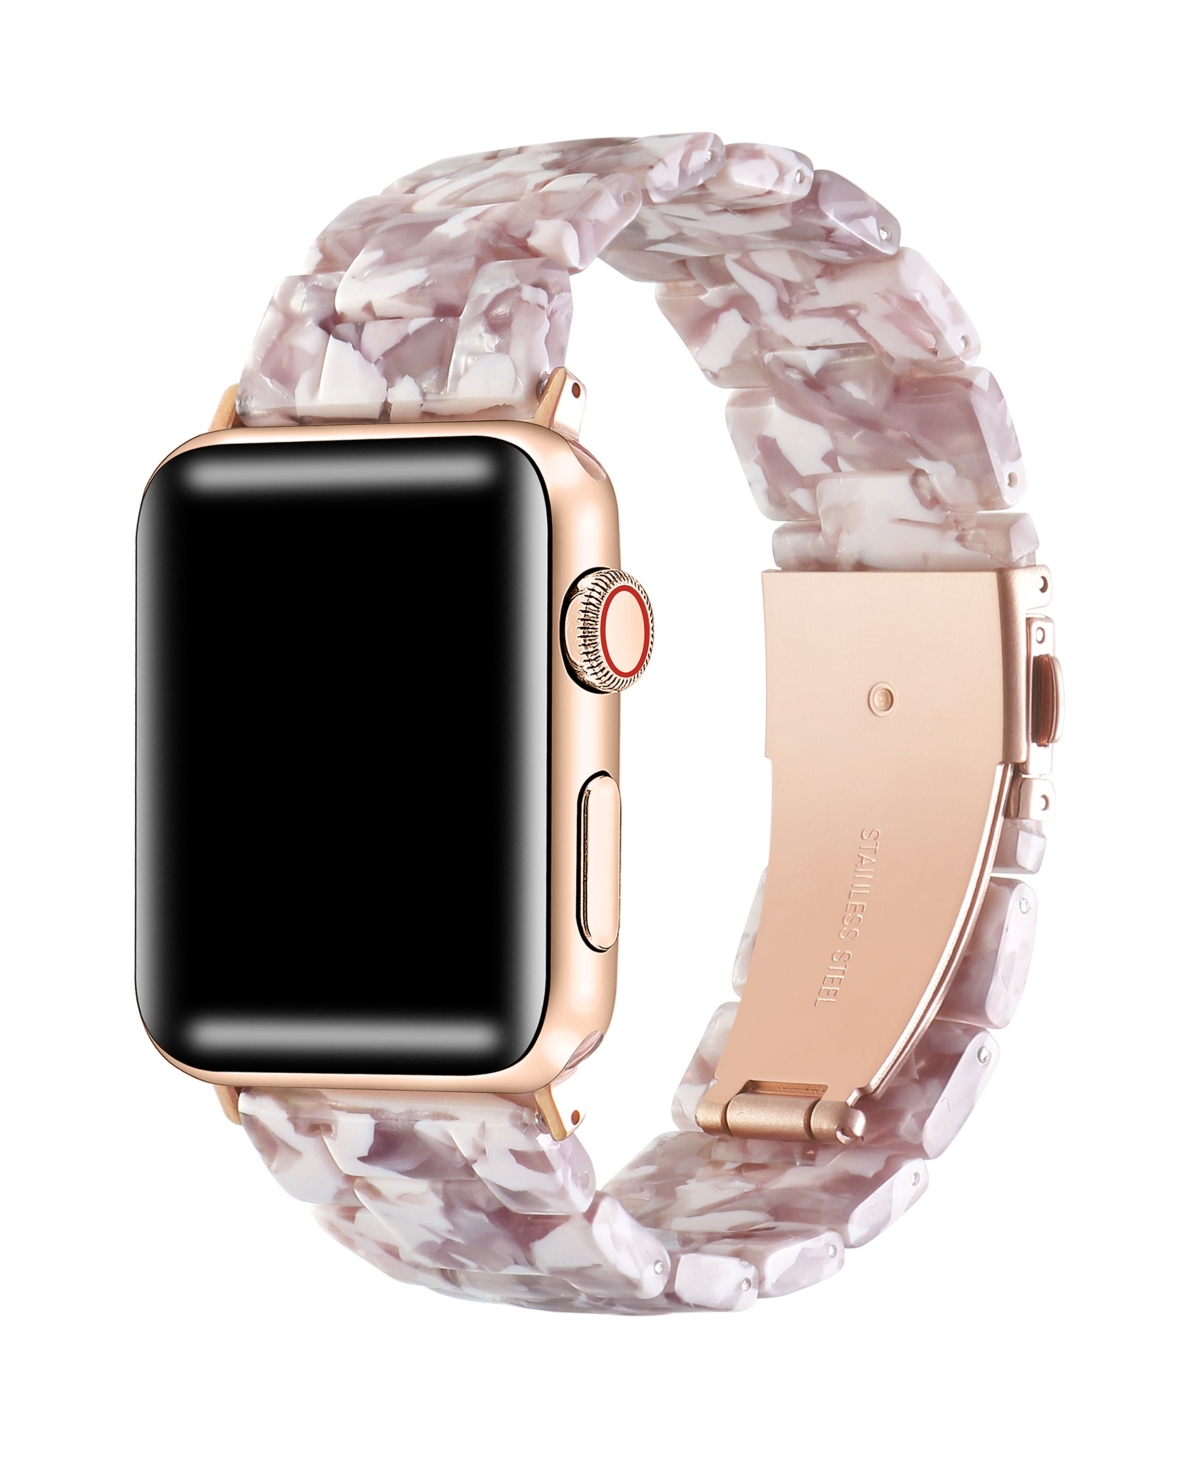 Shop Posh Tech Women's Claire Resin Band For Apple Watch Size-42mm,44mm,45mm,49mm In Stone